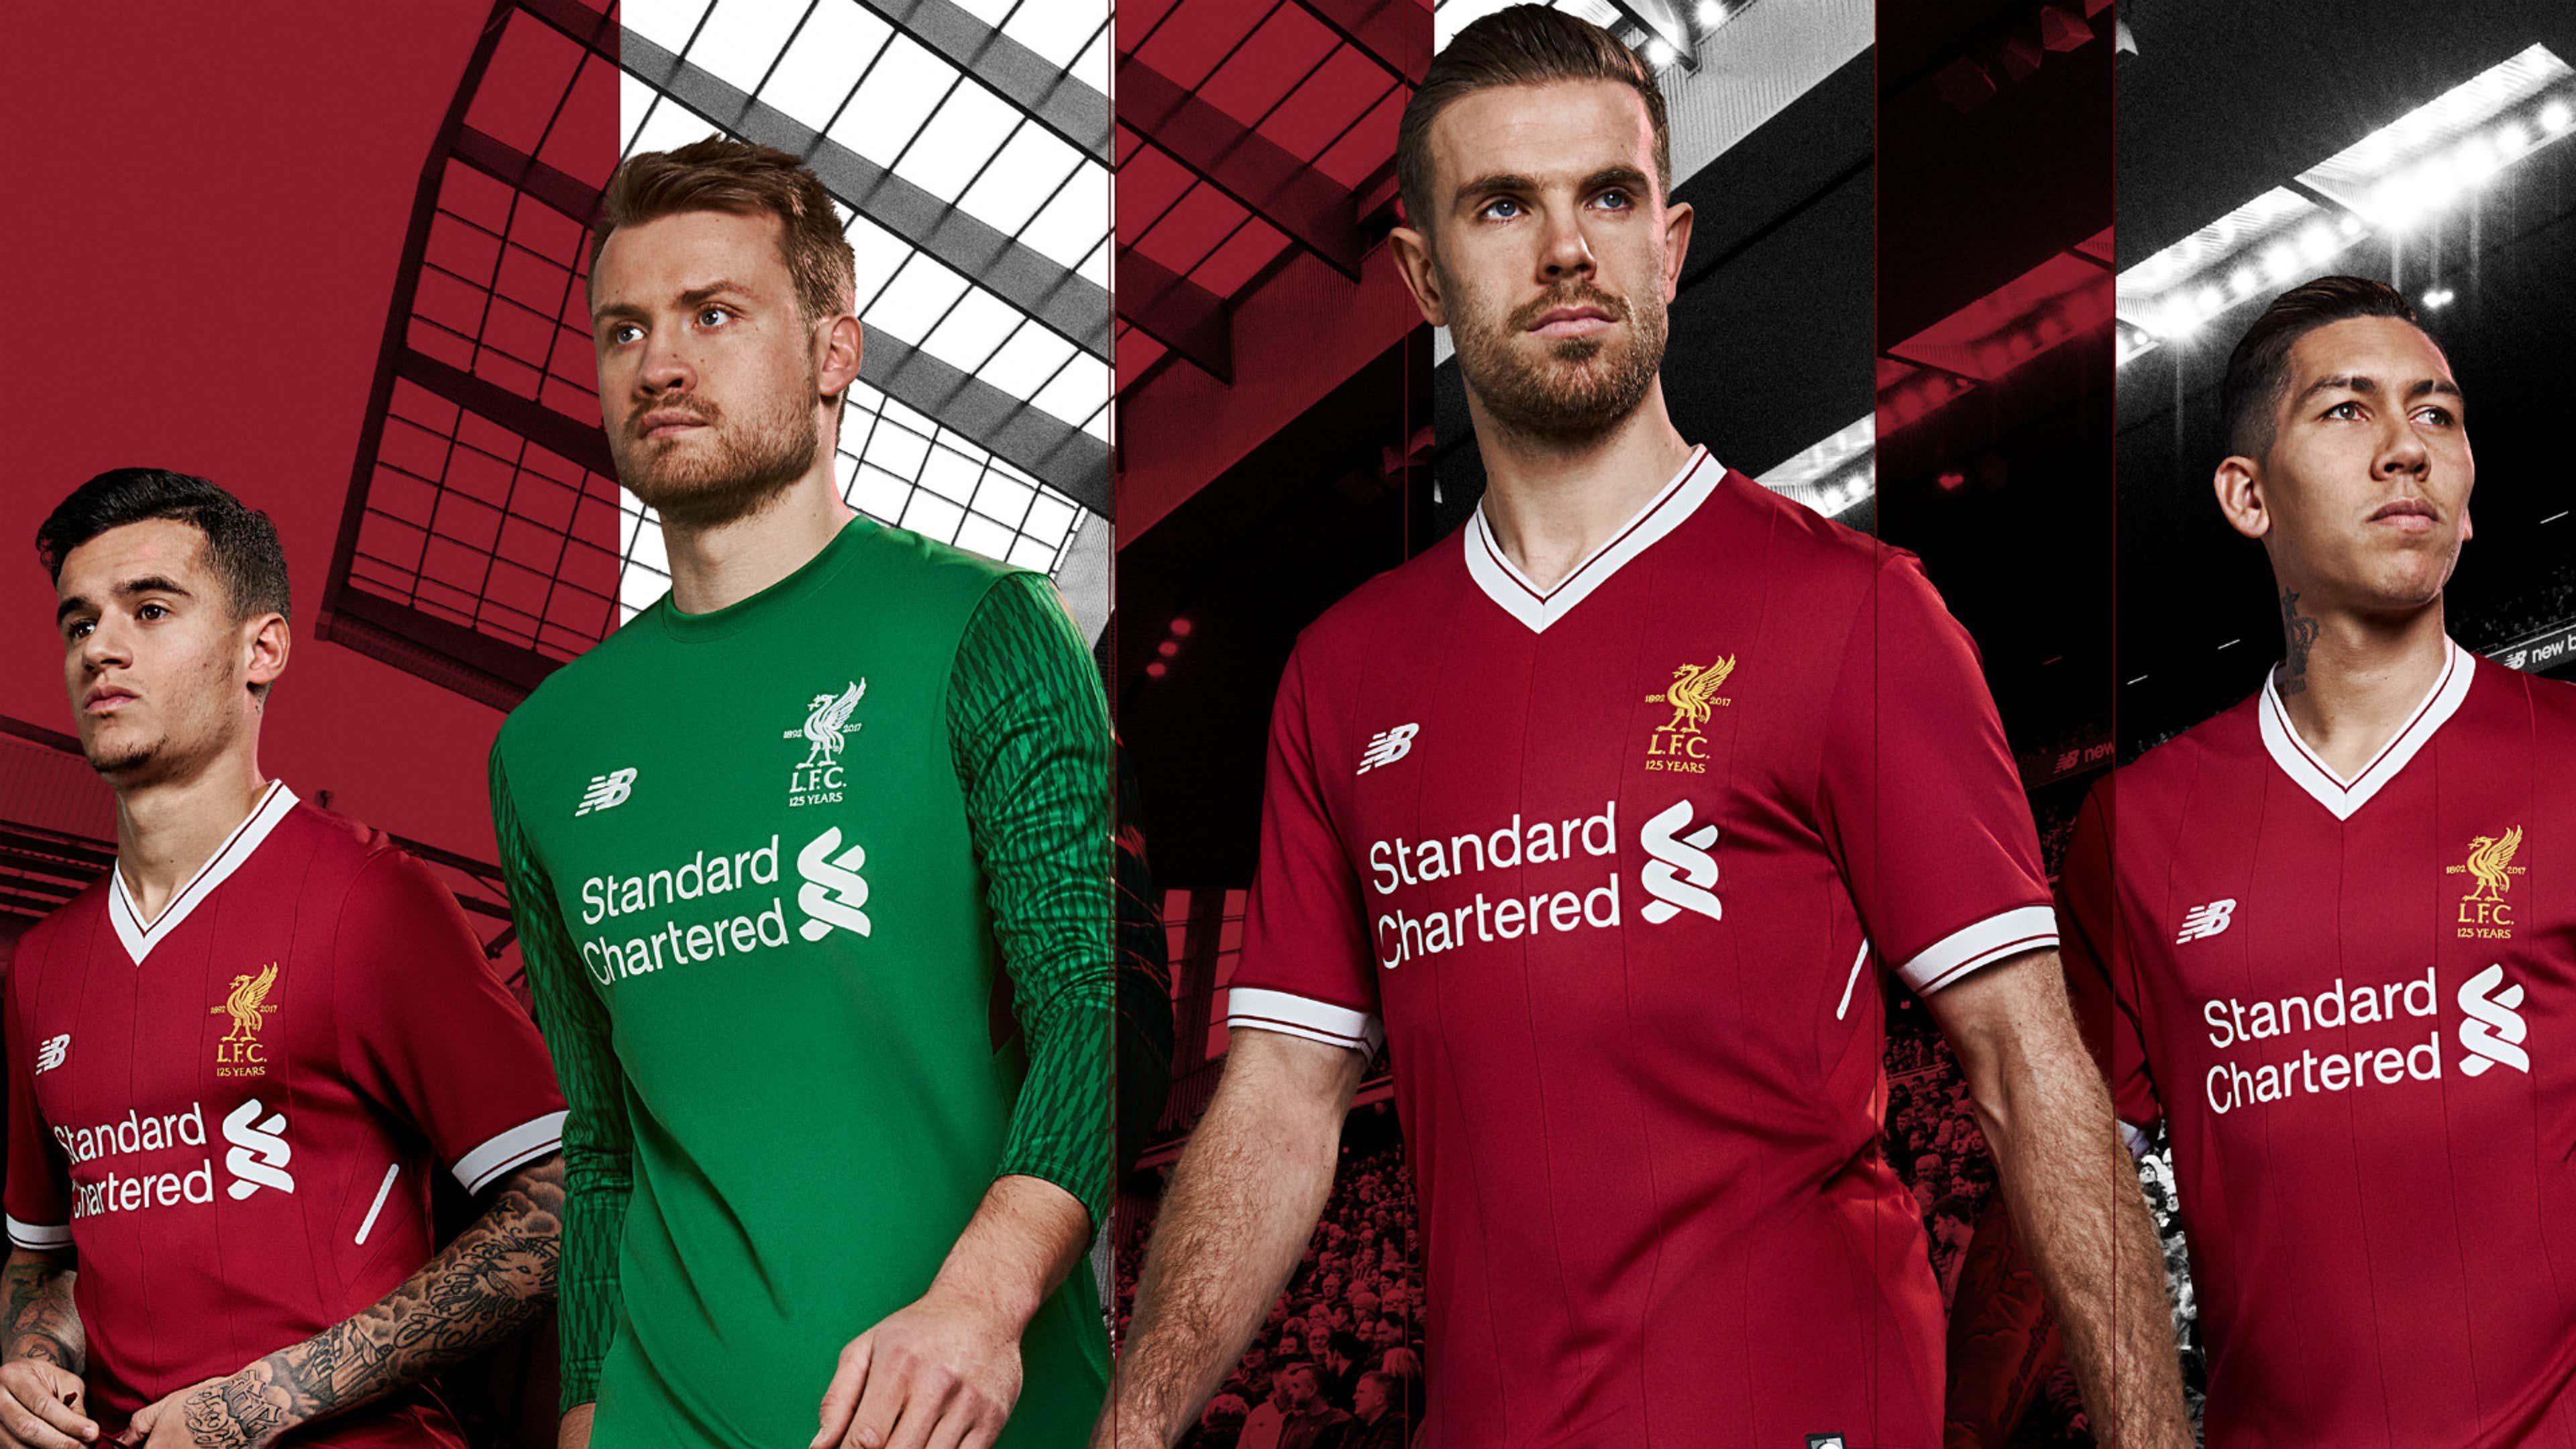 Liverpool's 2017/18 away kit is a green and white tribute to 90s